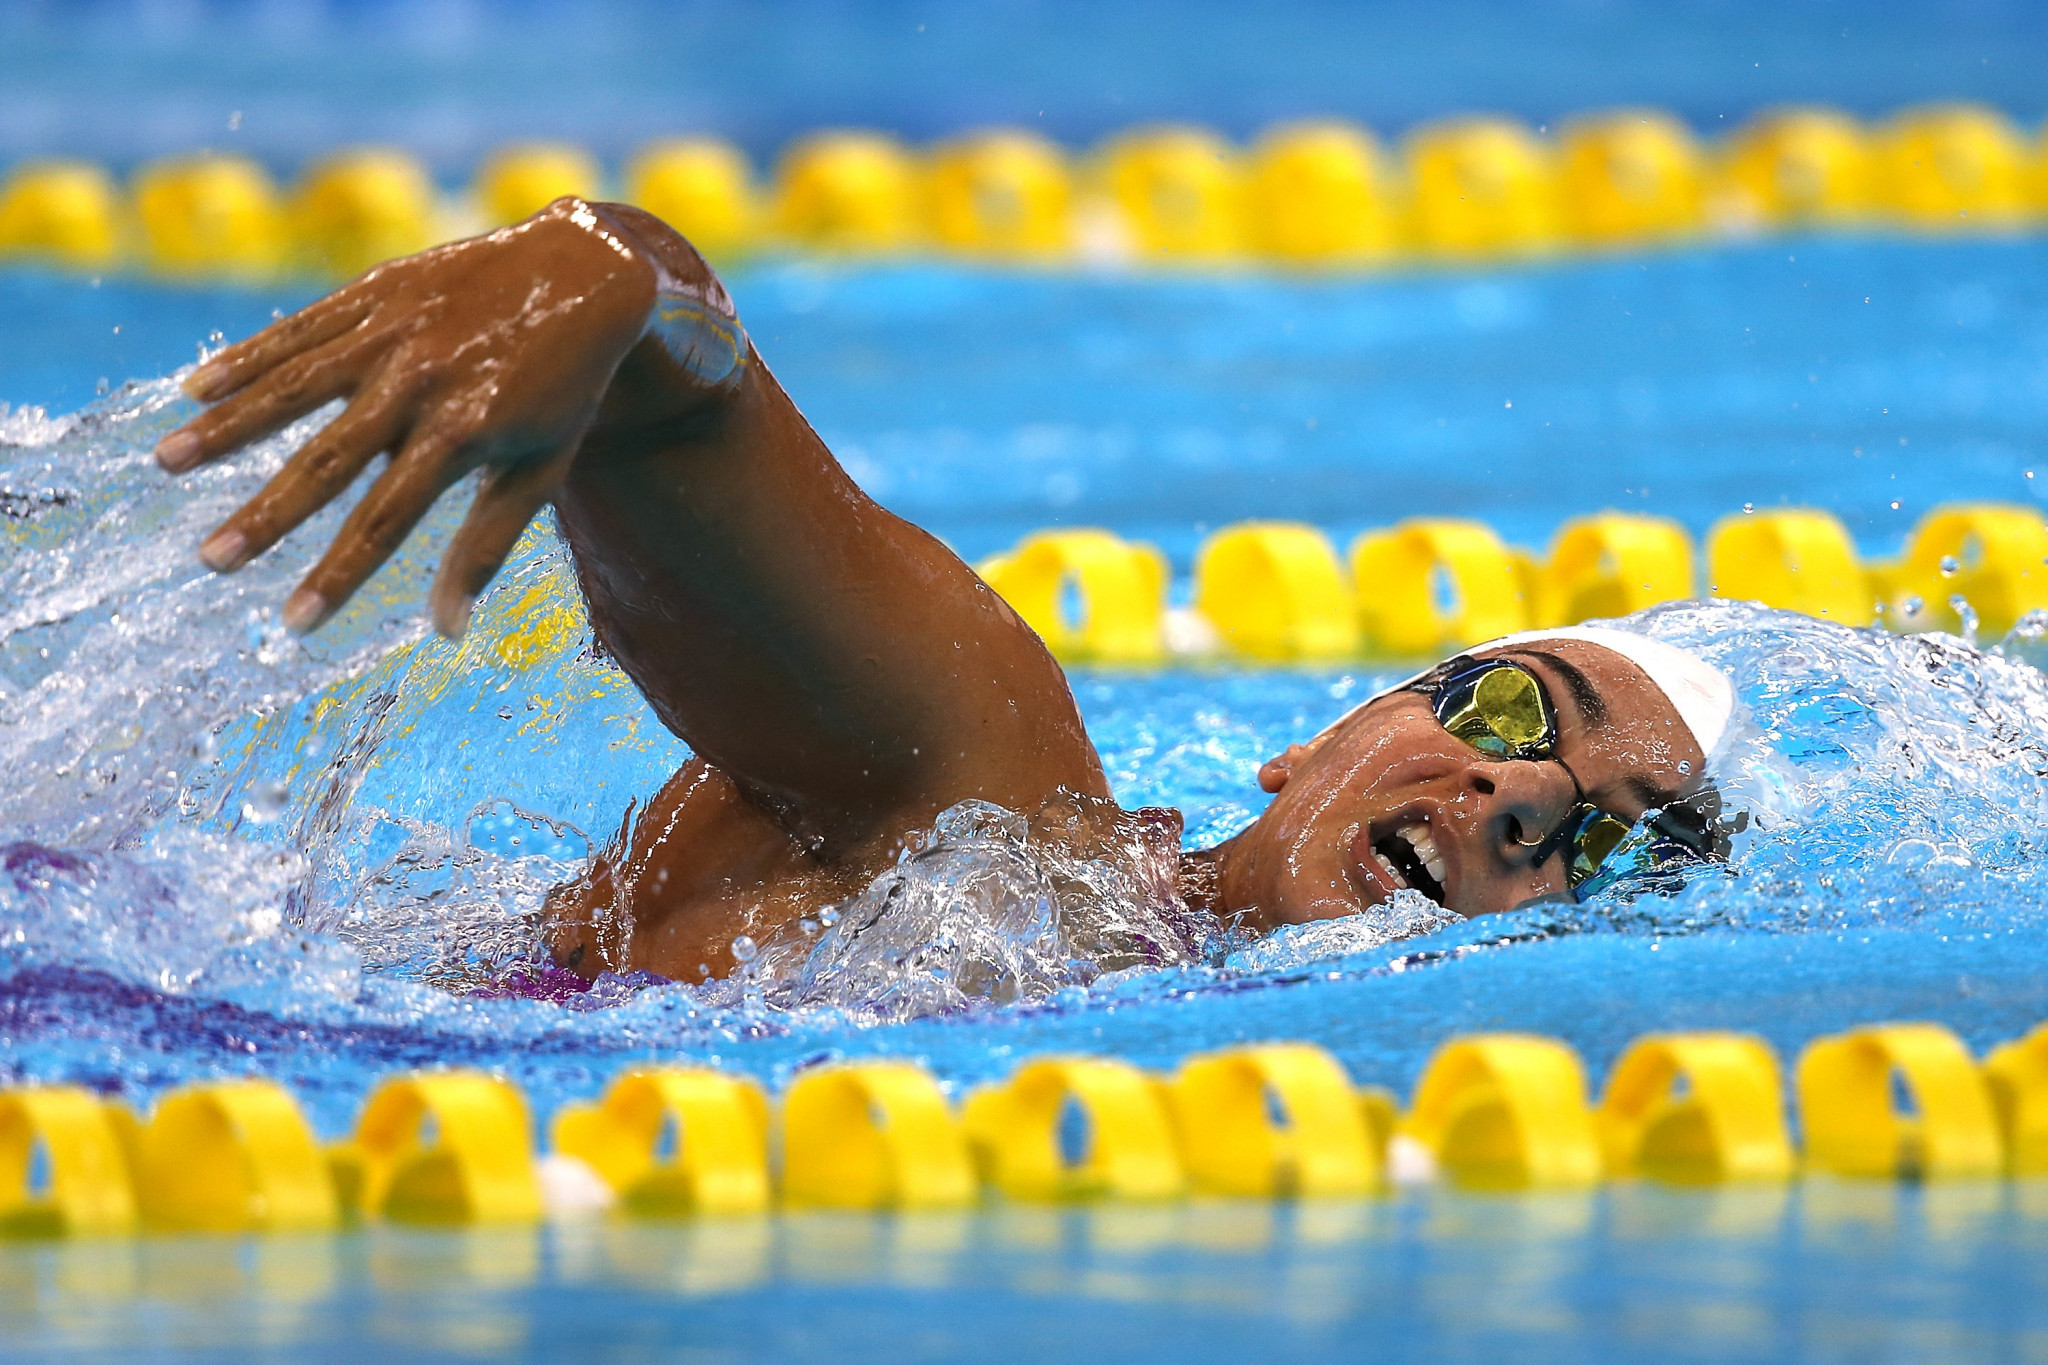 Brazil's Camille Rodrigues had to settle for the bronze medal in the women's 400m freestyle S9 event ©Getty Images